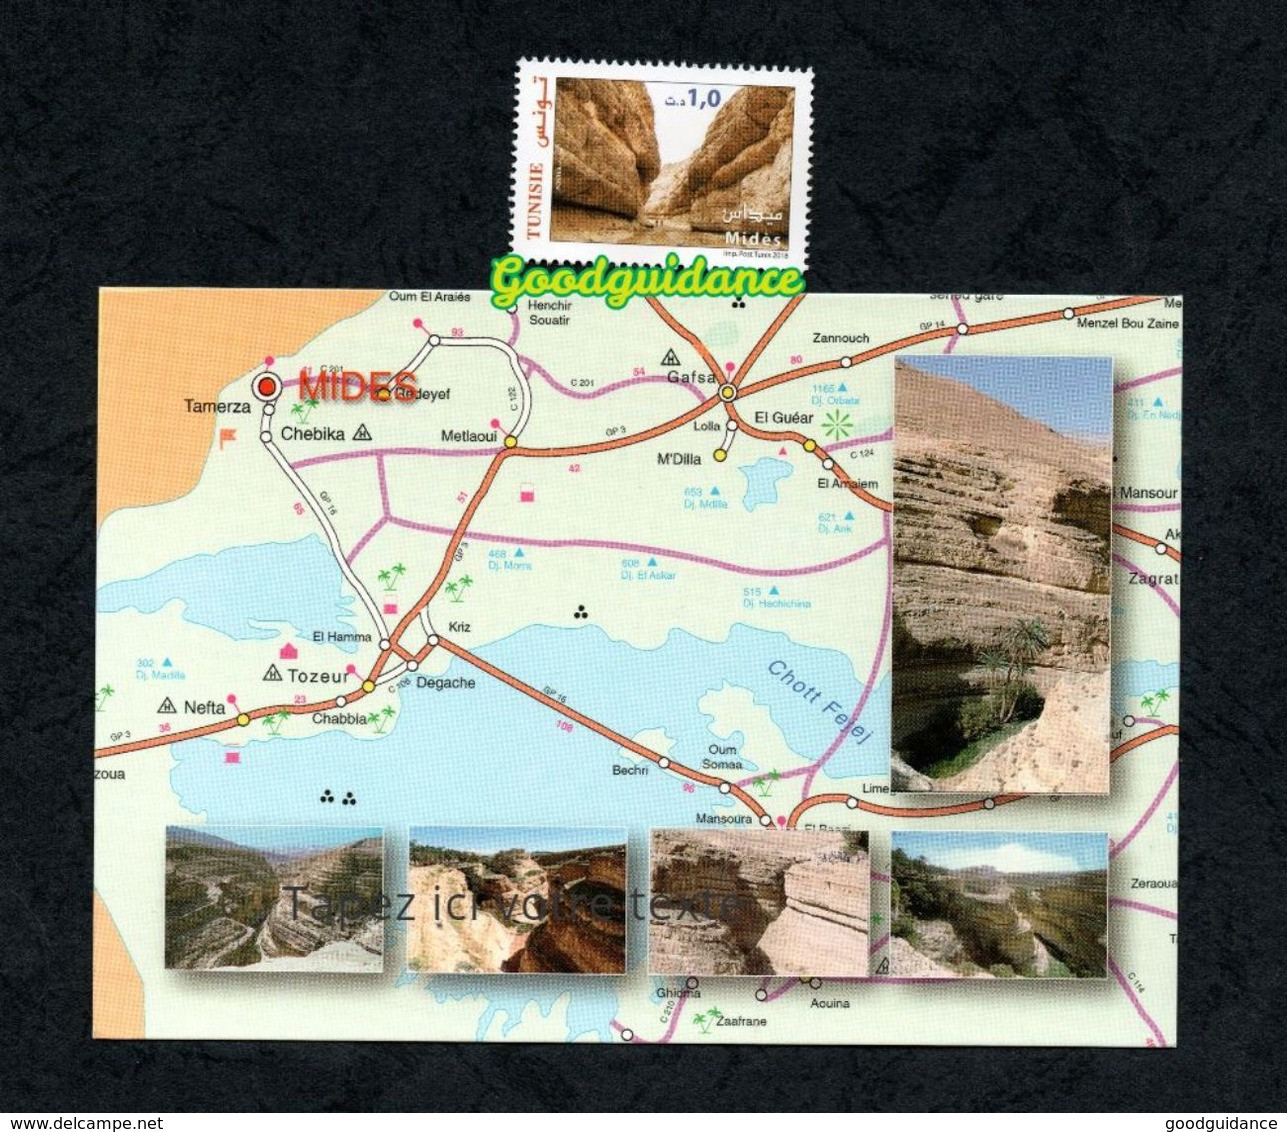 2018- Tunisia- Touristic And Archaeological Sites In Tunisia- Mides Postcard And Stamp MNH** - Archéologie